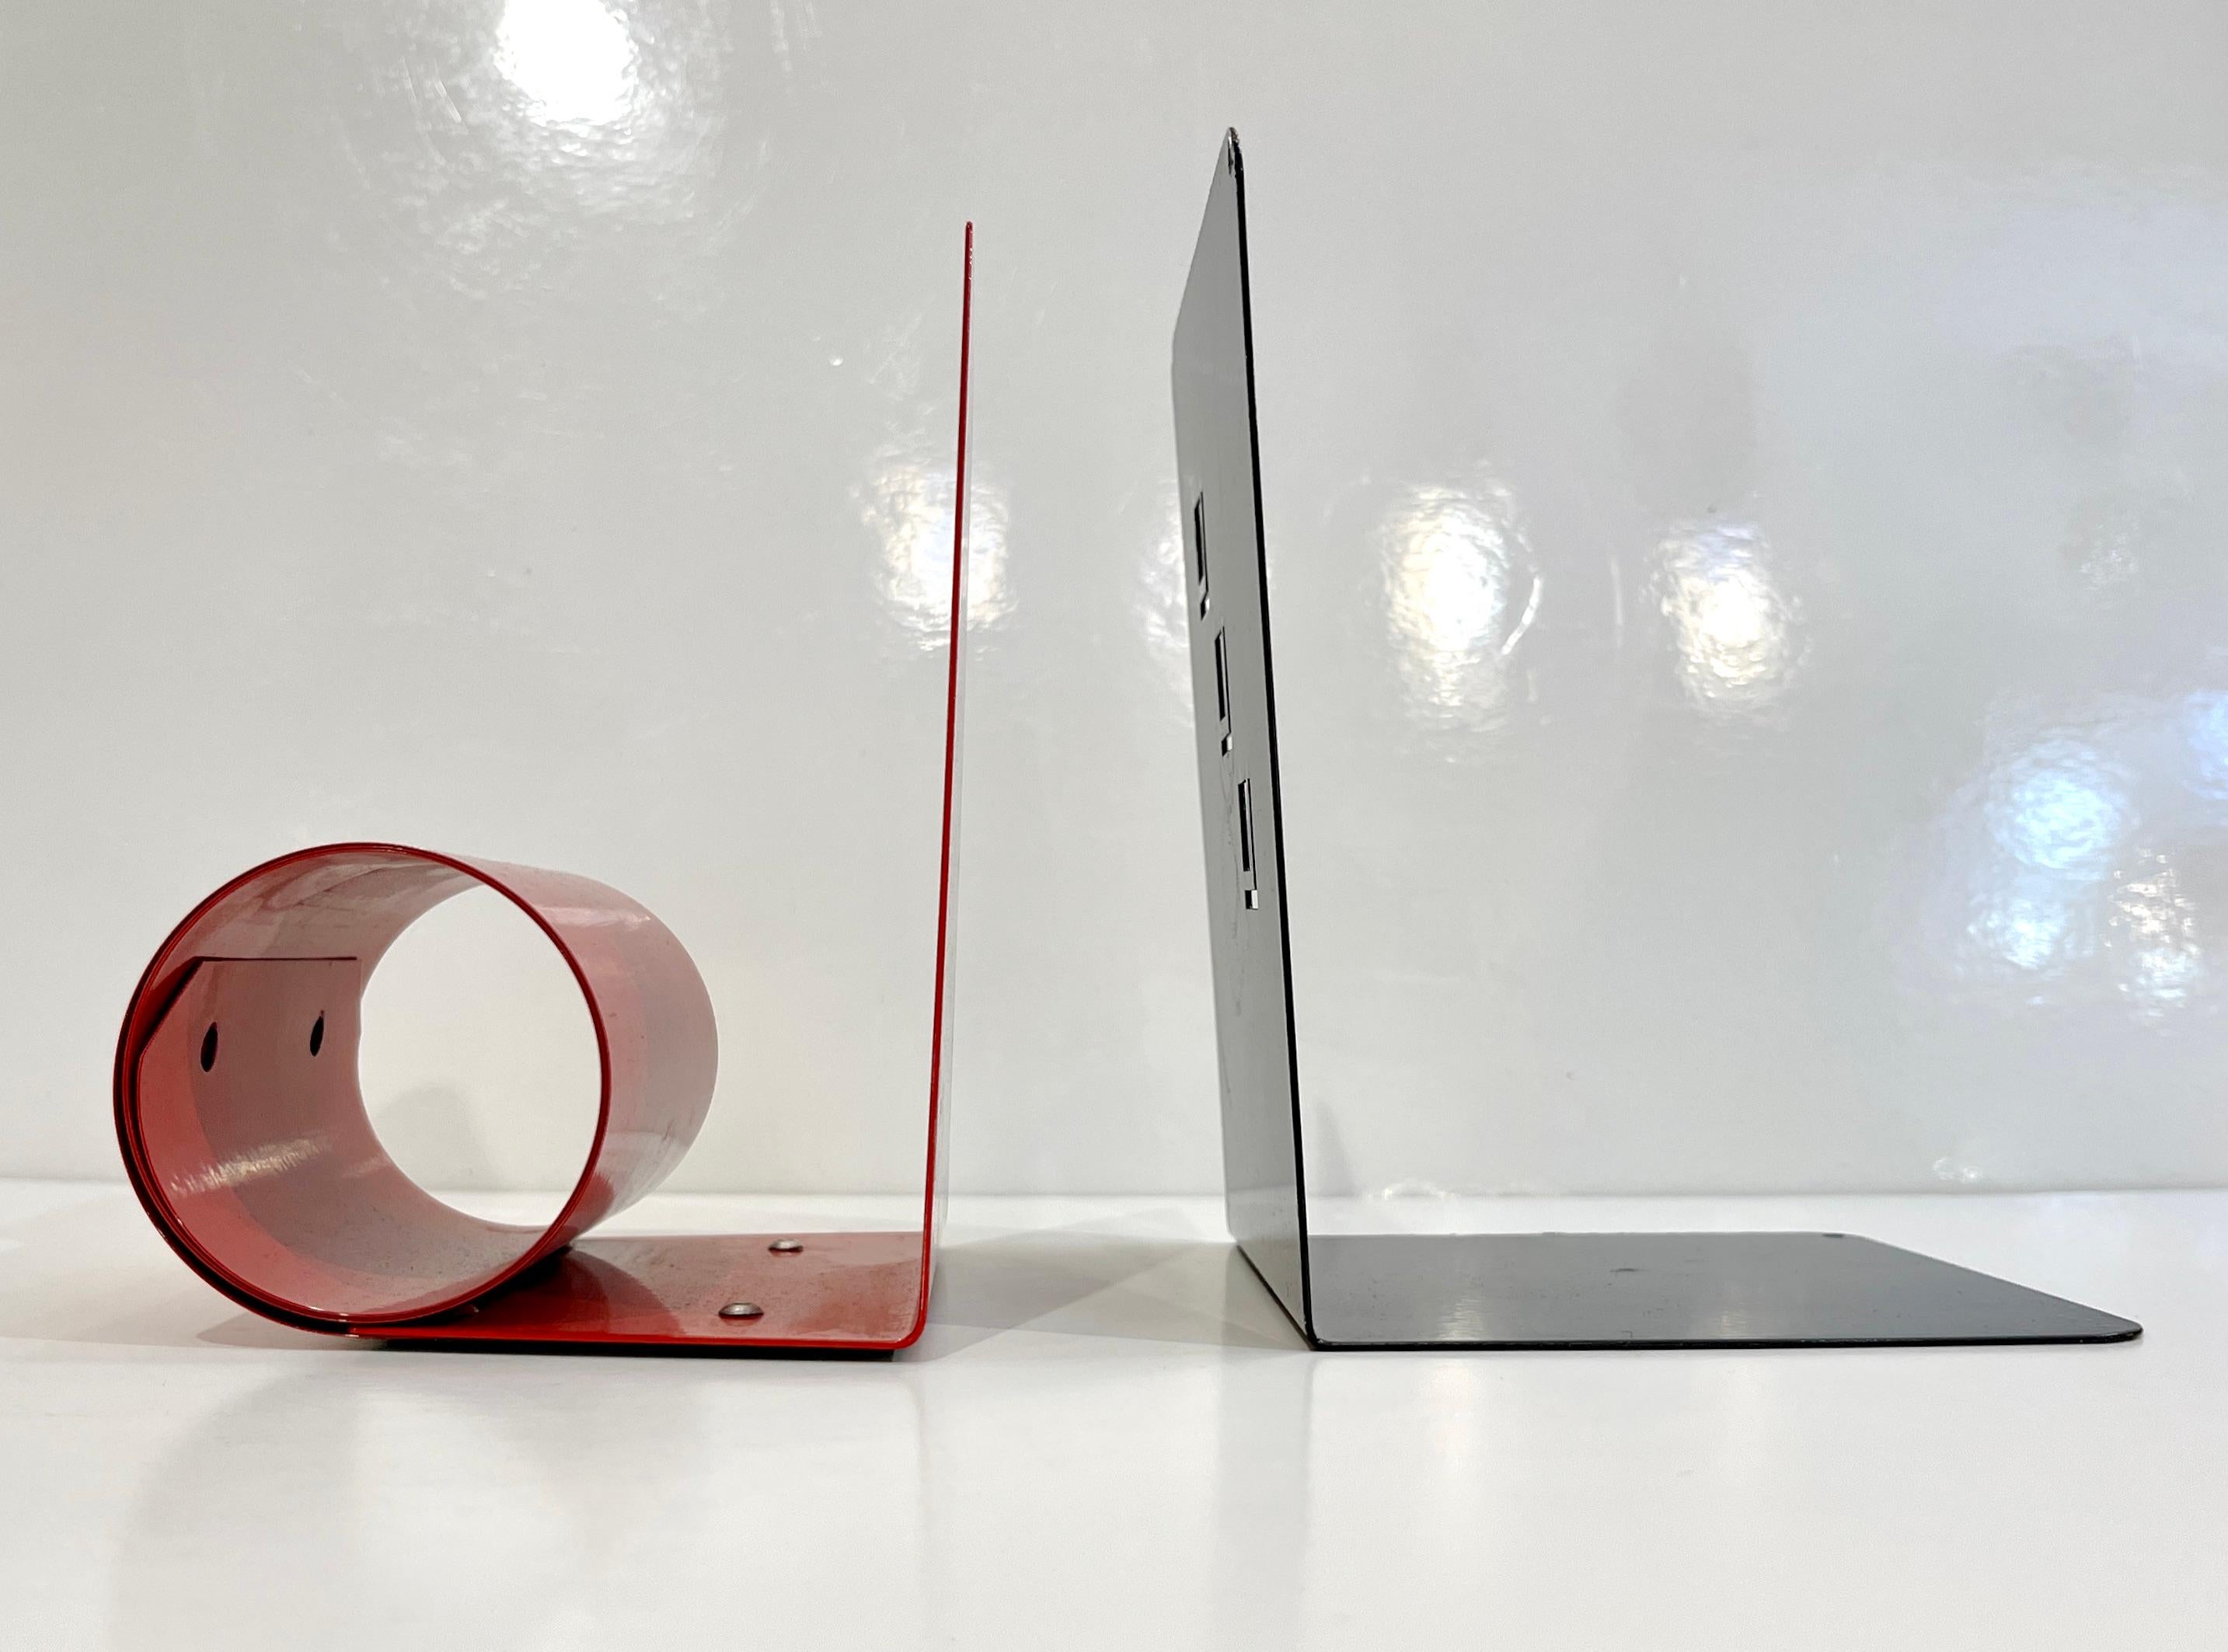 1970s Italian Vintage Red & Black Lacquered Metal Post-Modern Geometric Bookends For Sale 1